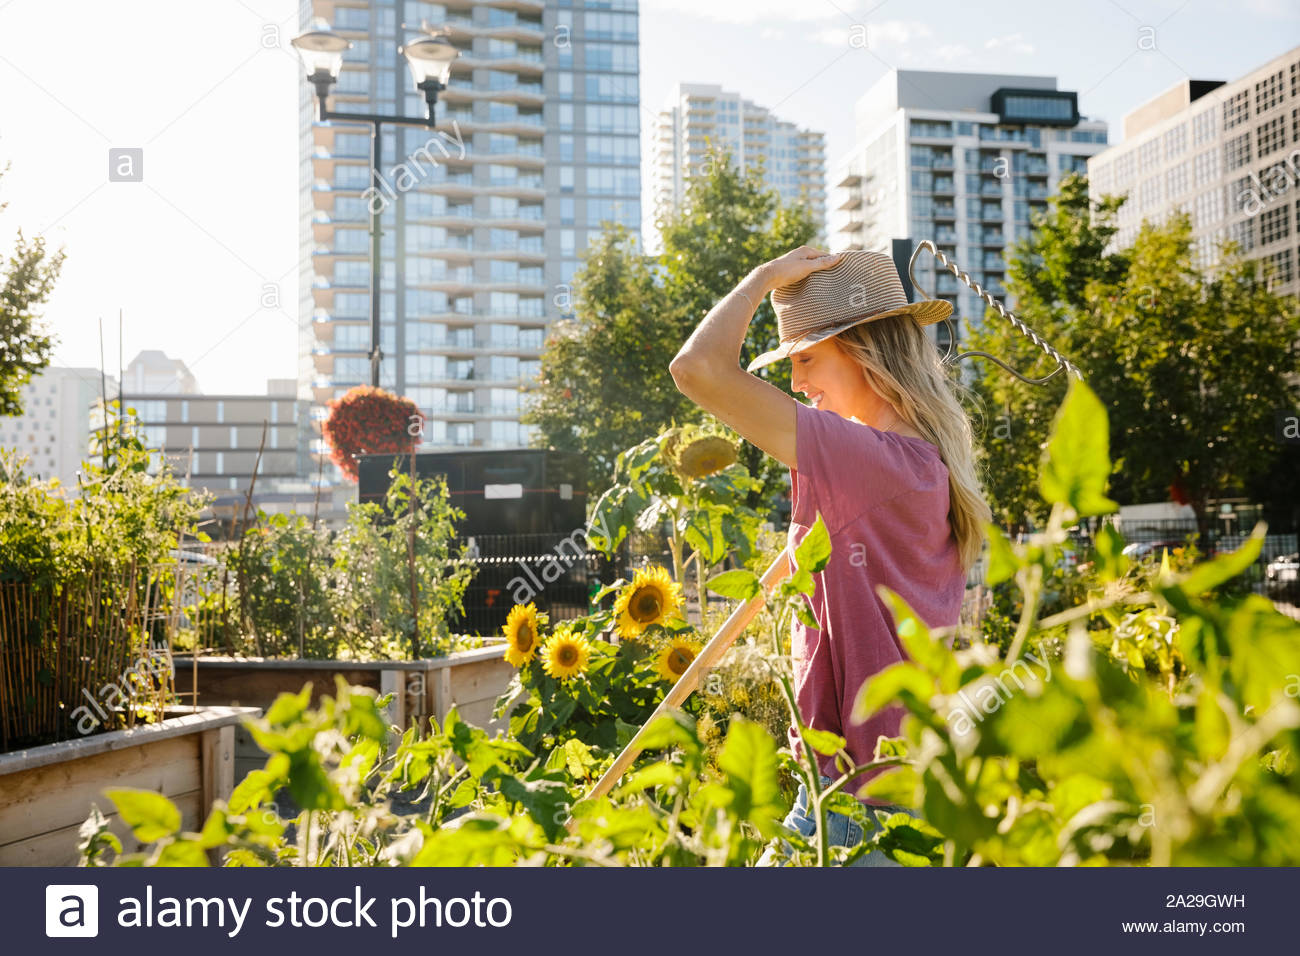 Happy young woman with sun hat in sunny, urban community garden Stock Photo